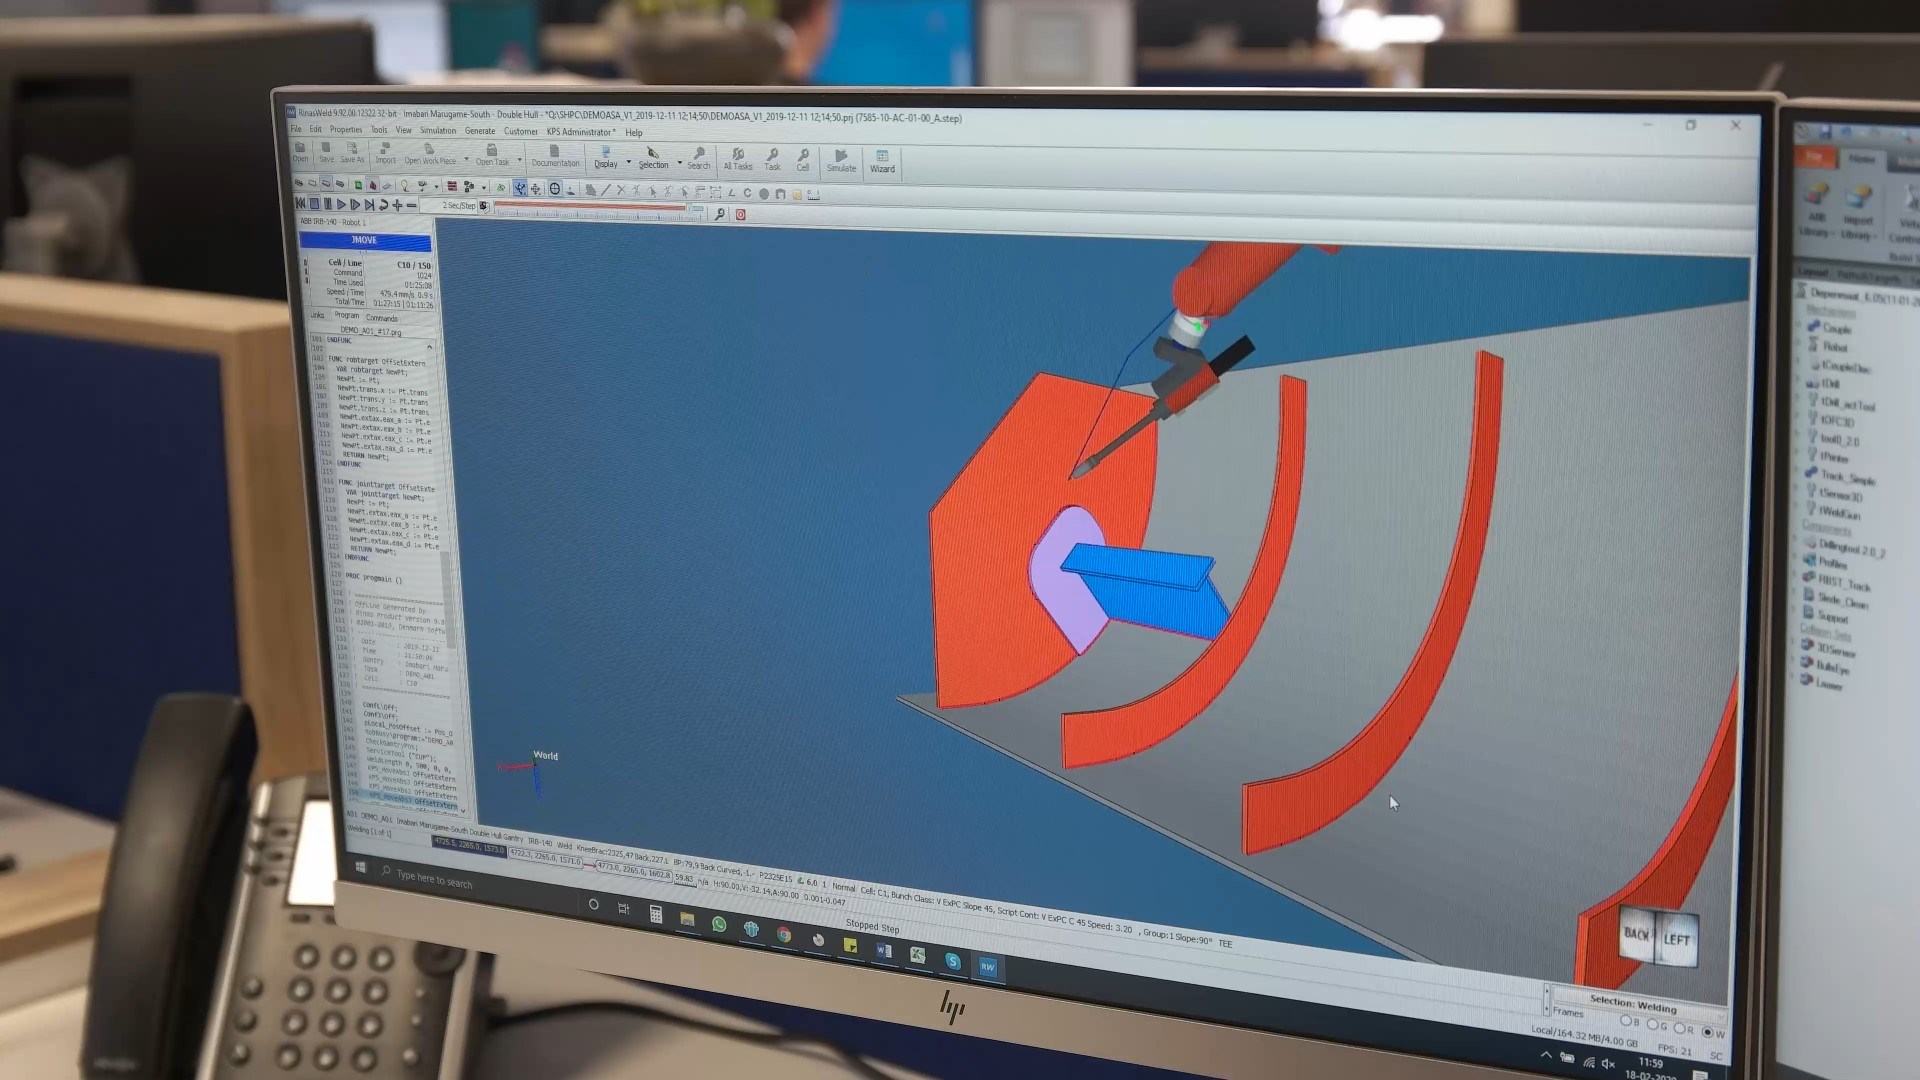 Rinasweld curved panel welding simulation